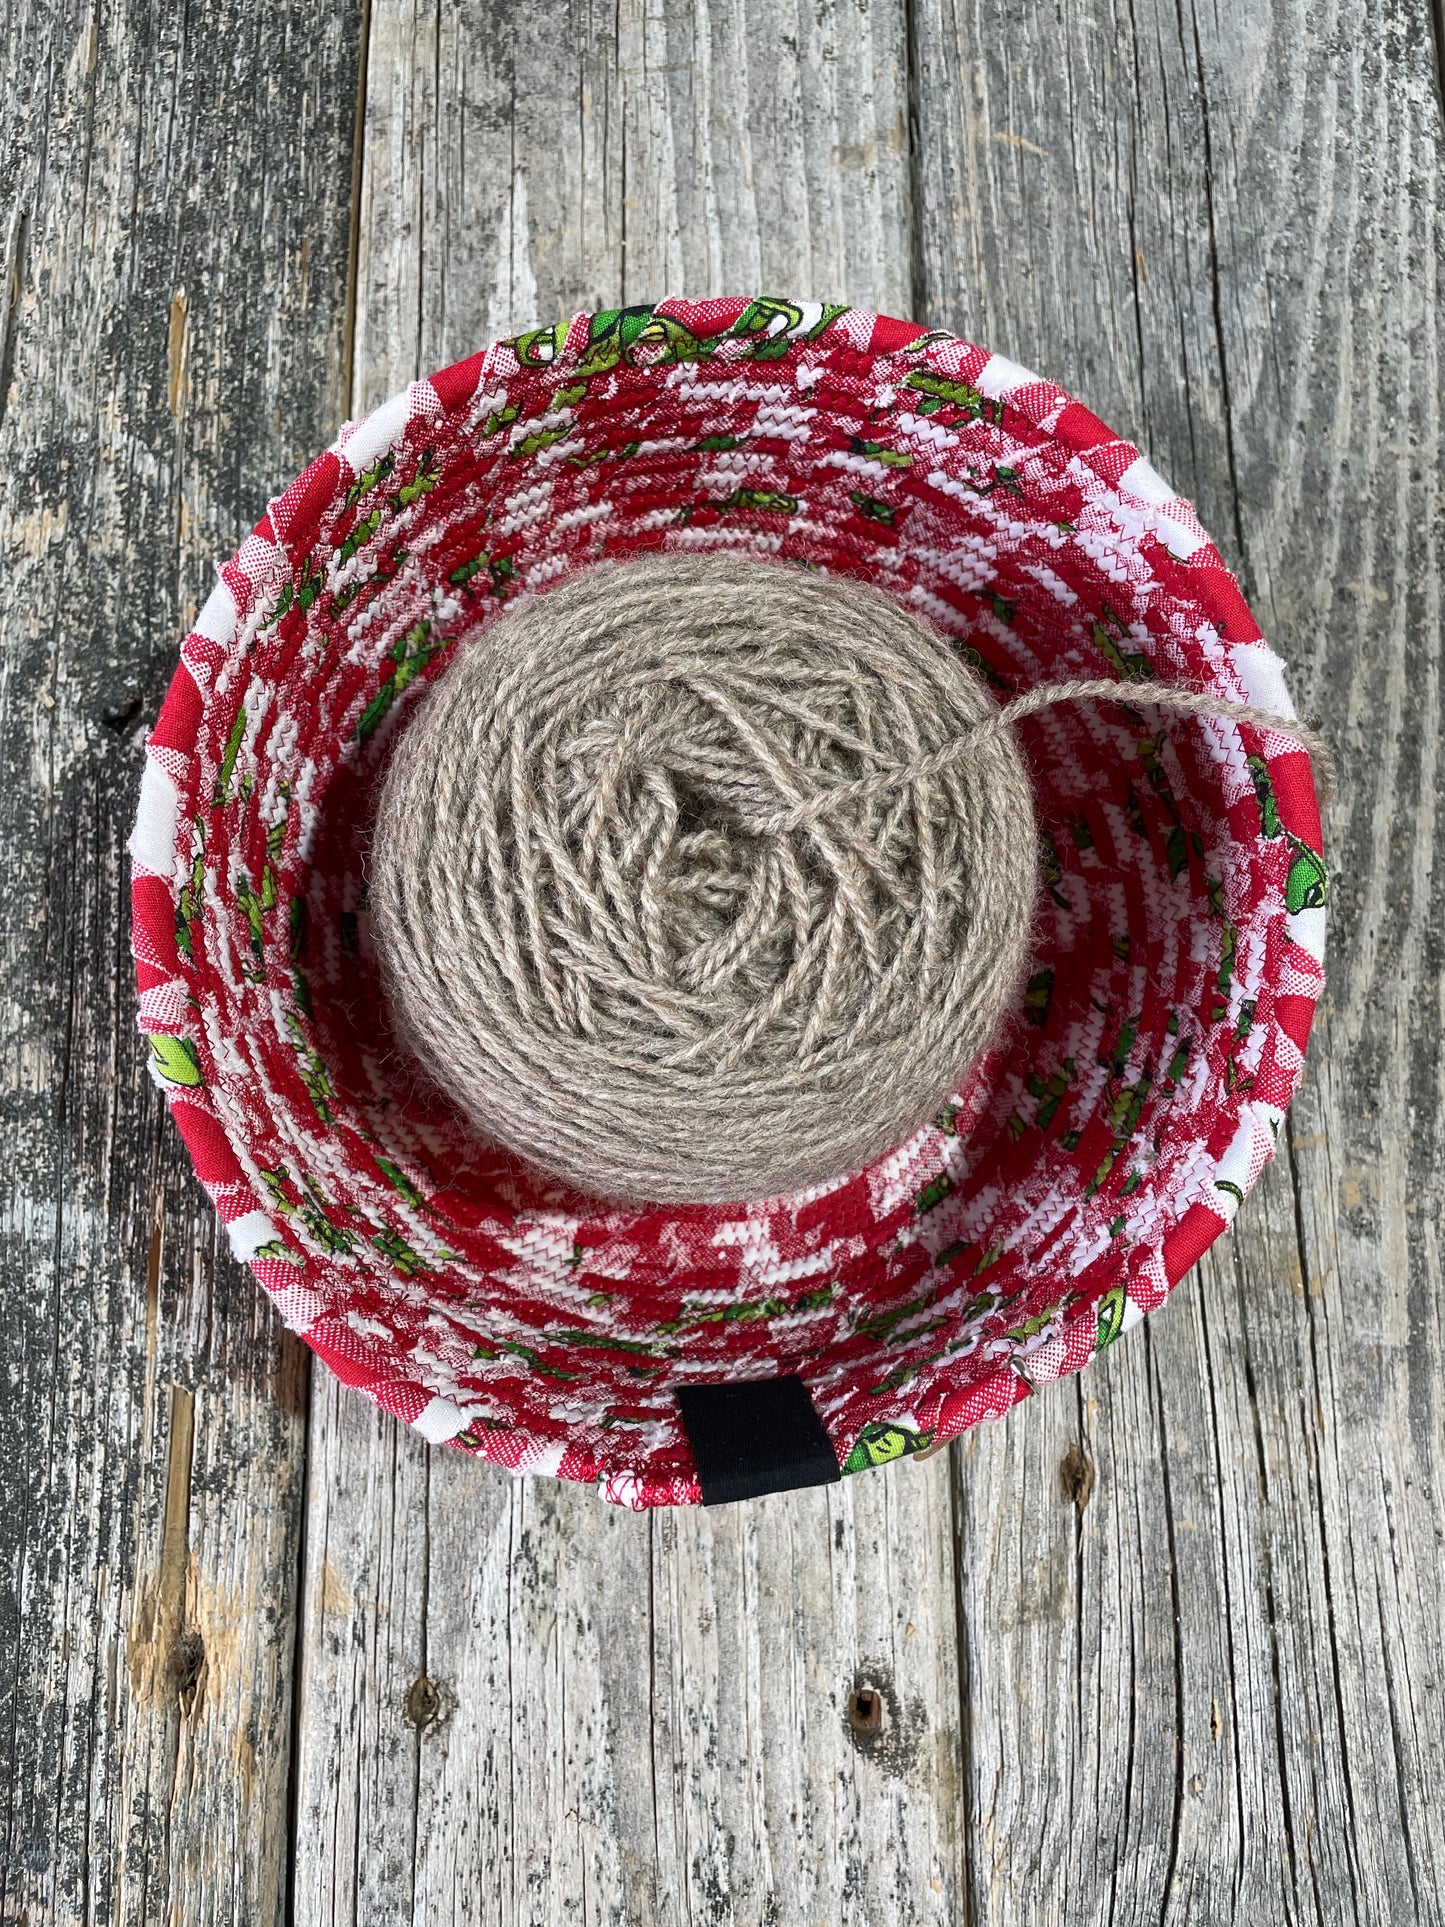 Red & Green 1 - Handmade Fabric/Rope Project Bowls by TkPomroy/The Wooly Ghost